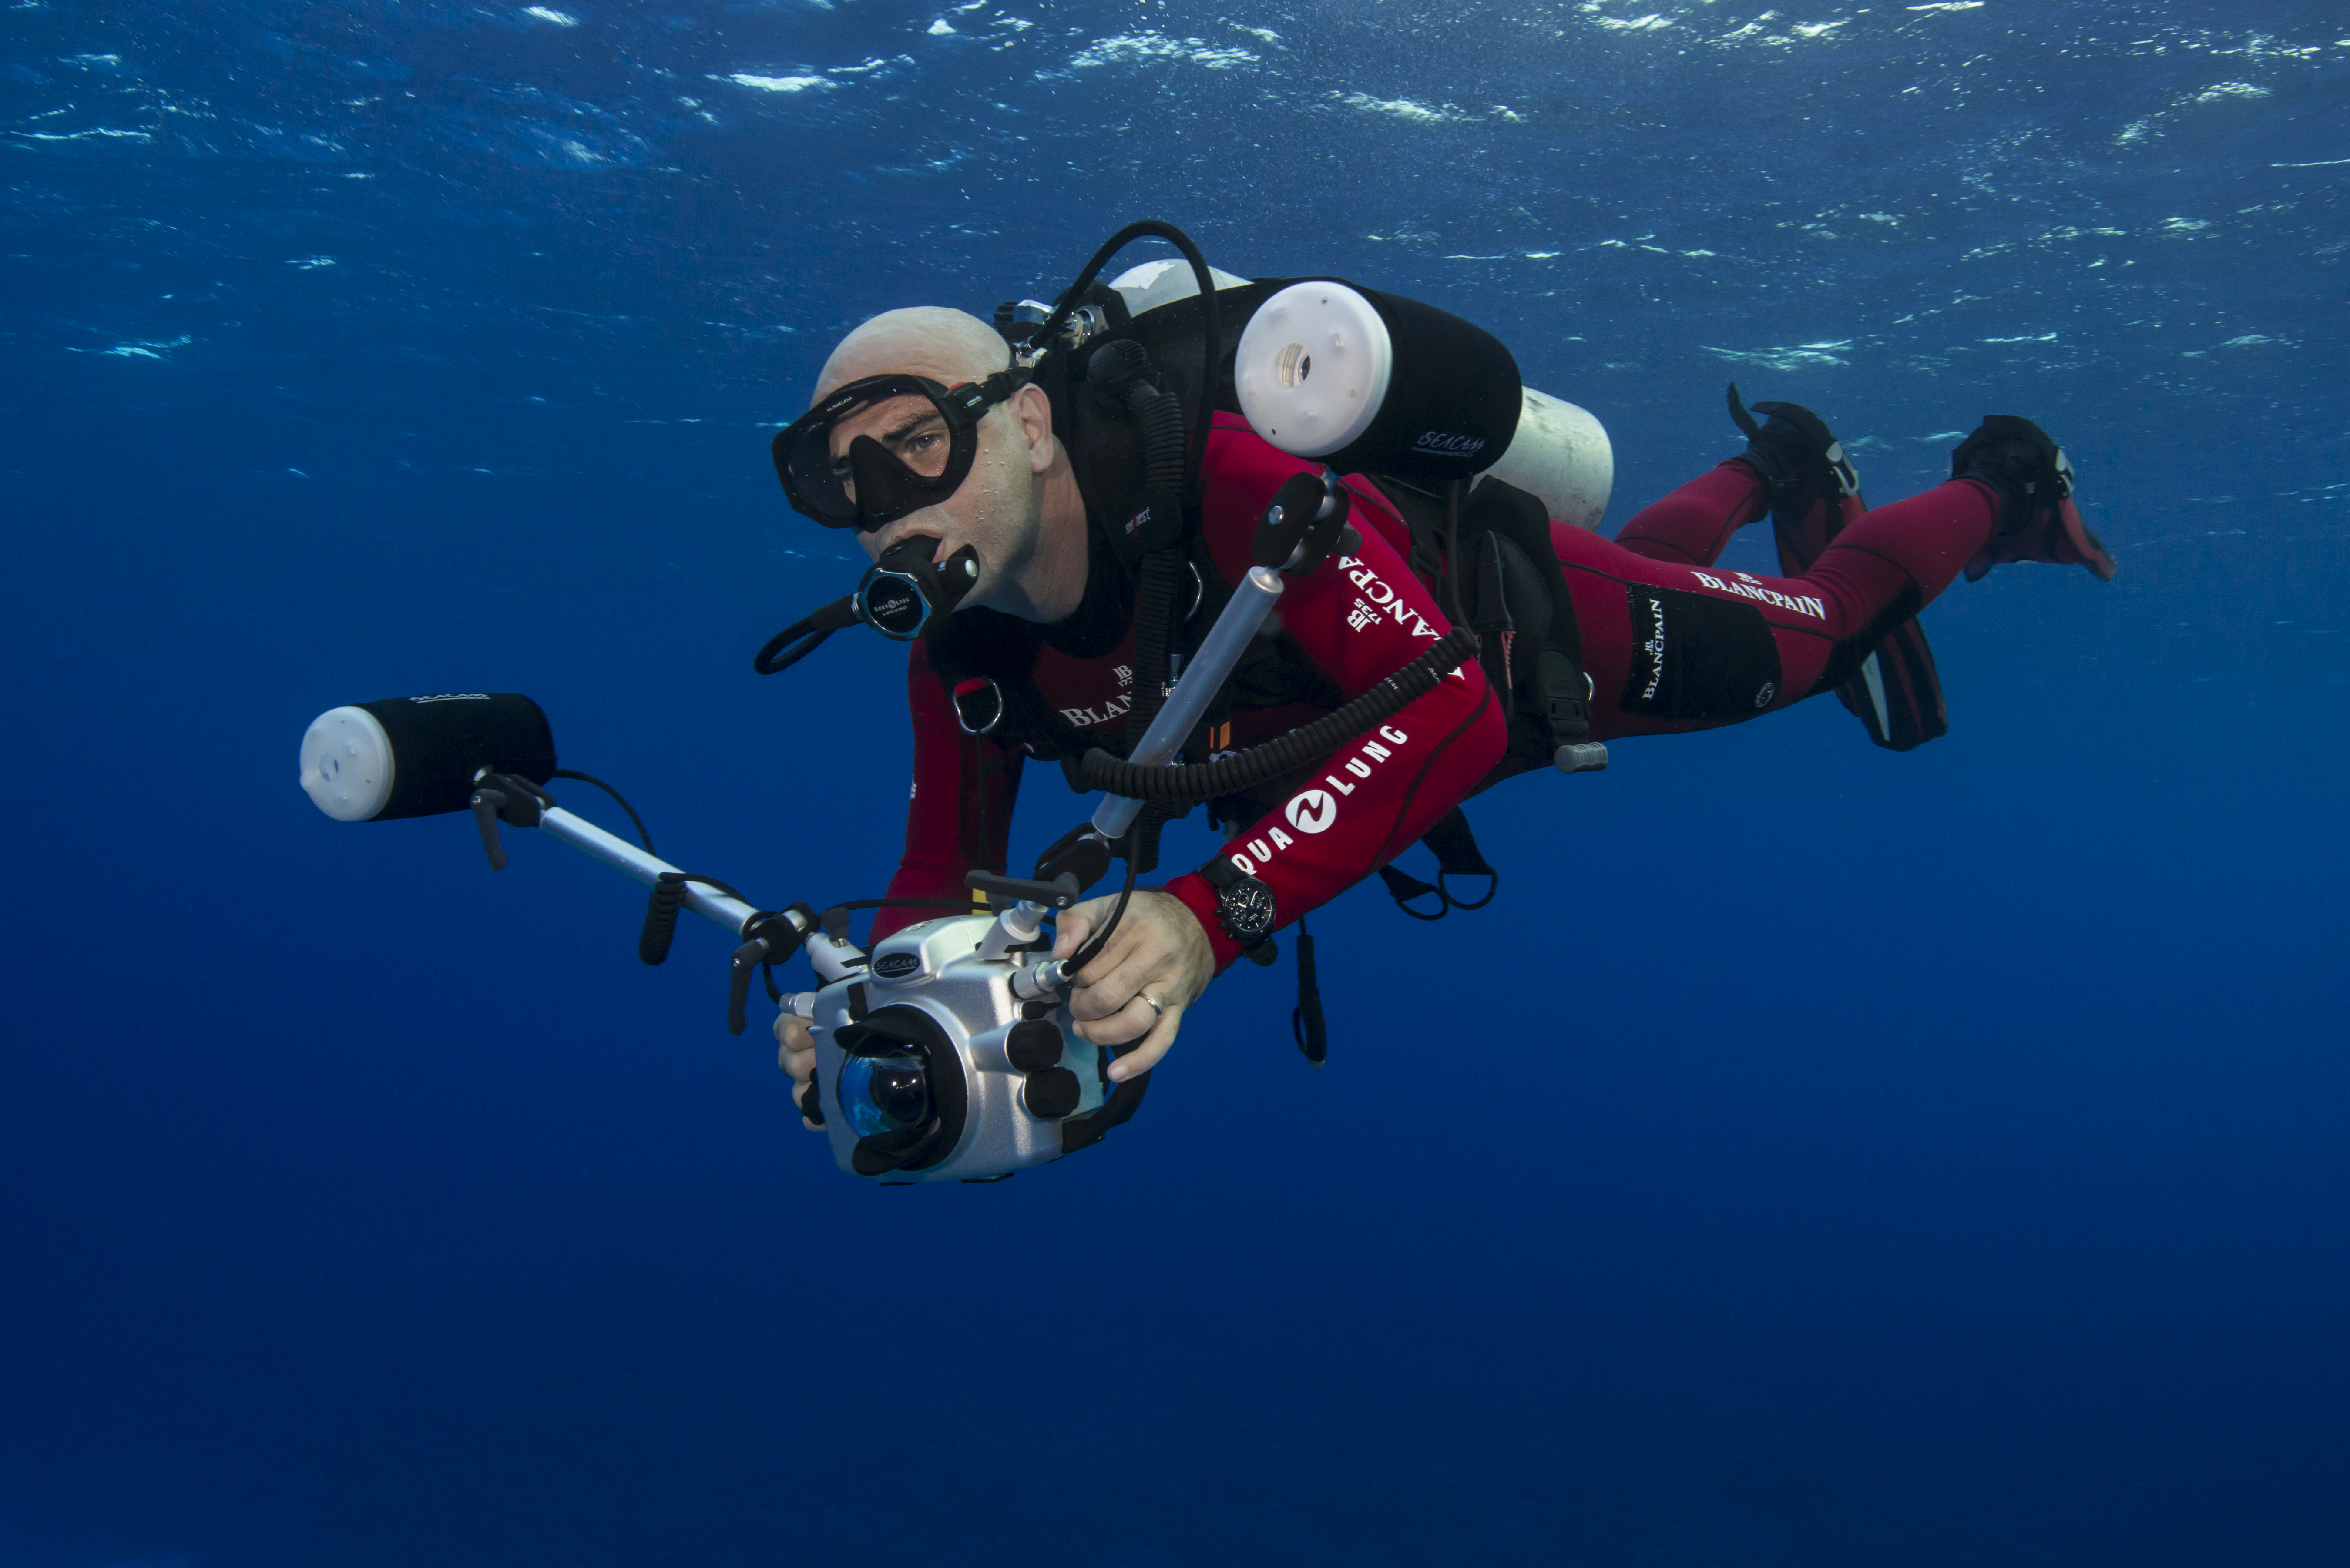 Marc A. Hayek, President and CEO of Blancpain, diving in Fakarava, French Polynesia, during the 2014 Blancpain Diving Experience expedition ©Mark Strickland (1)